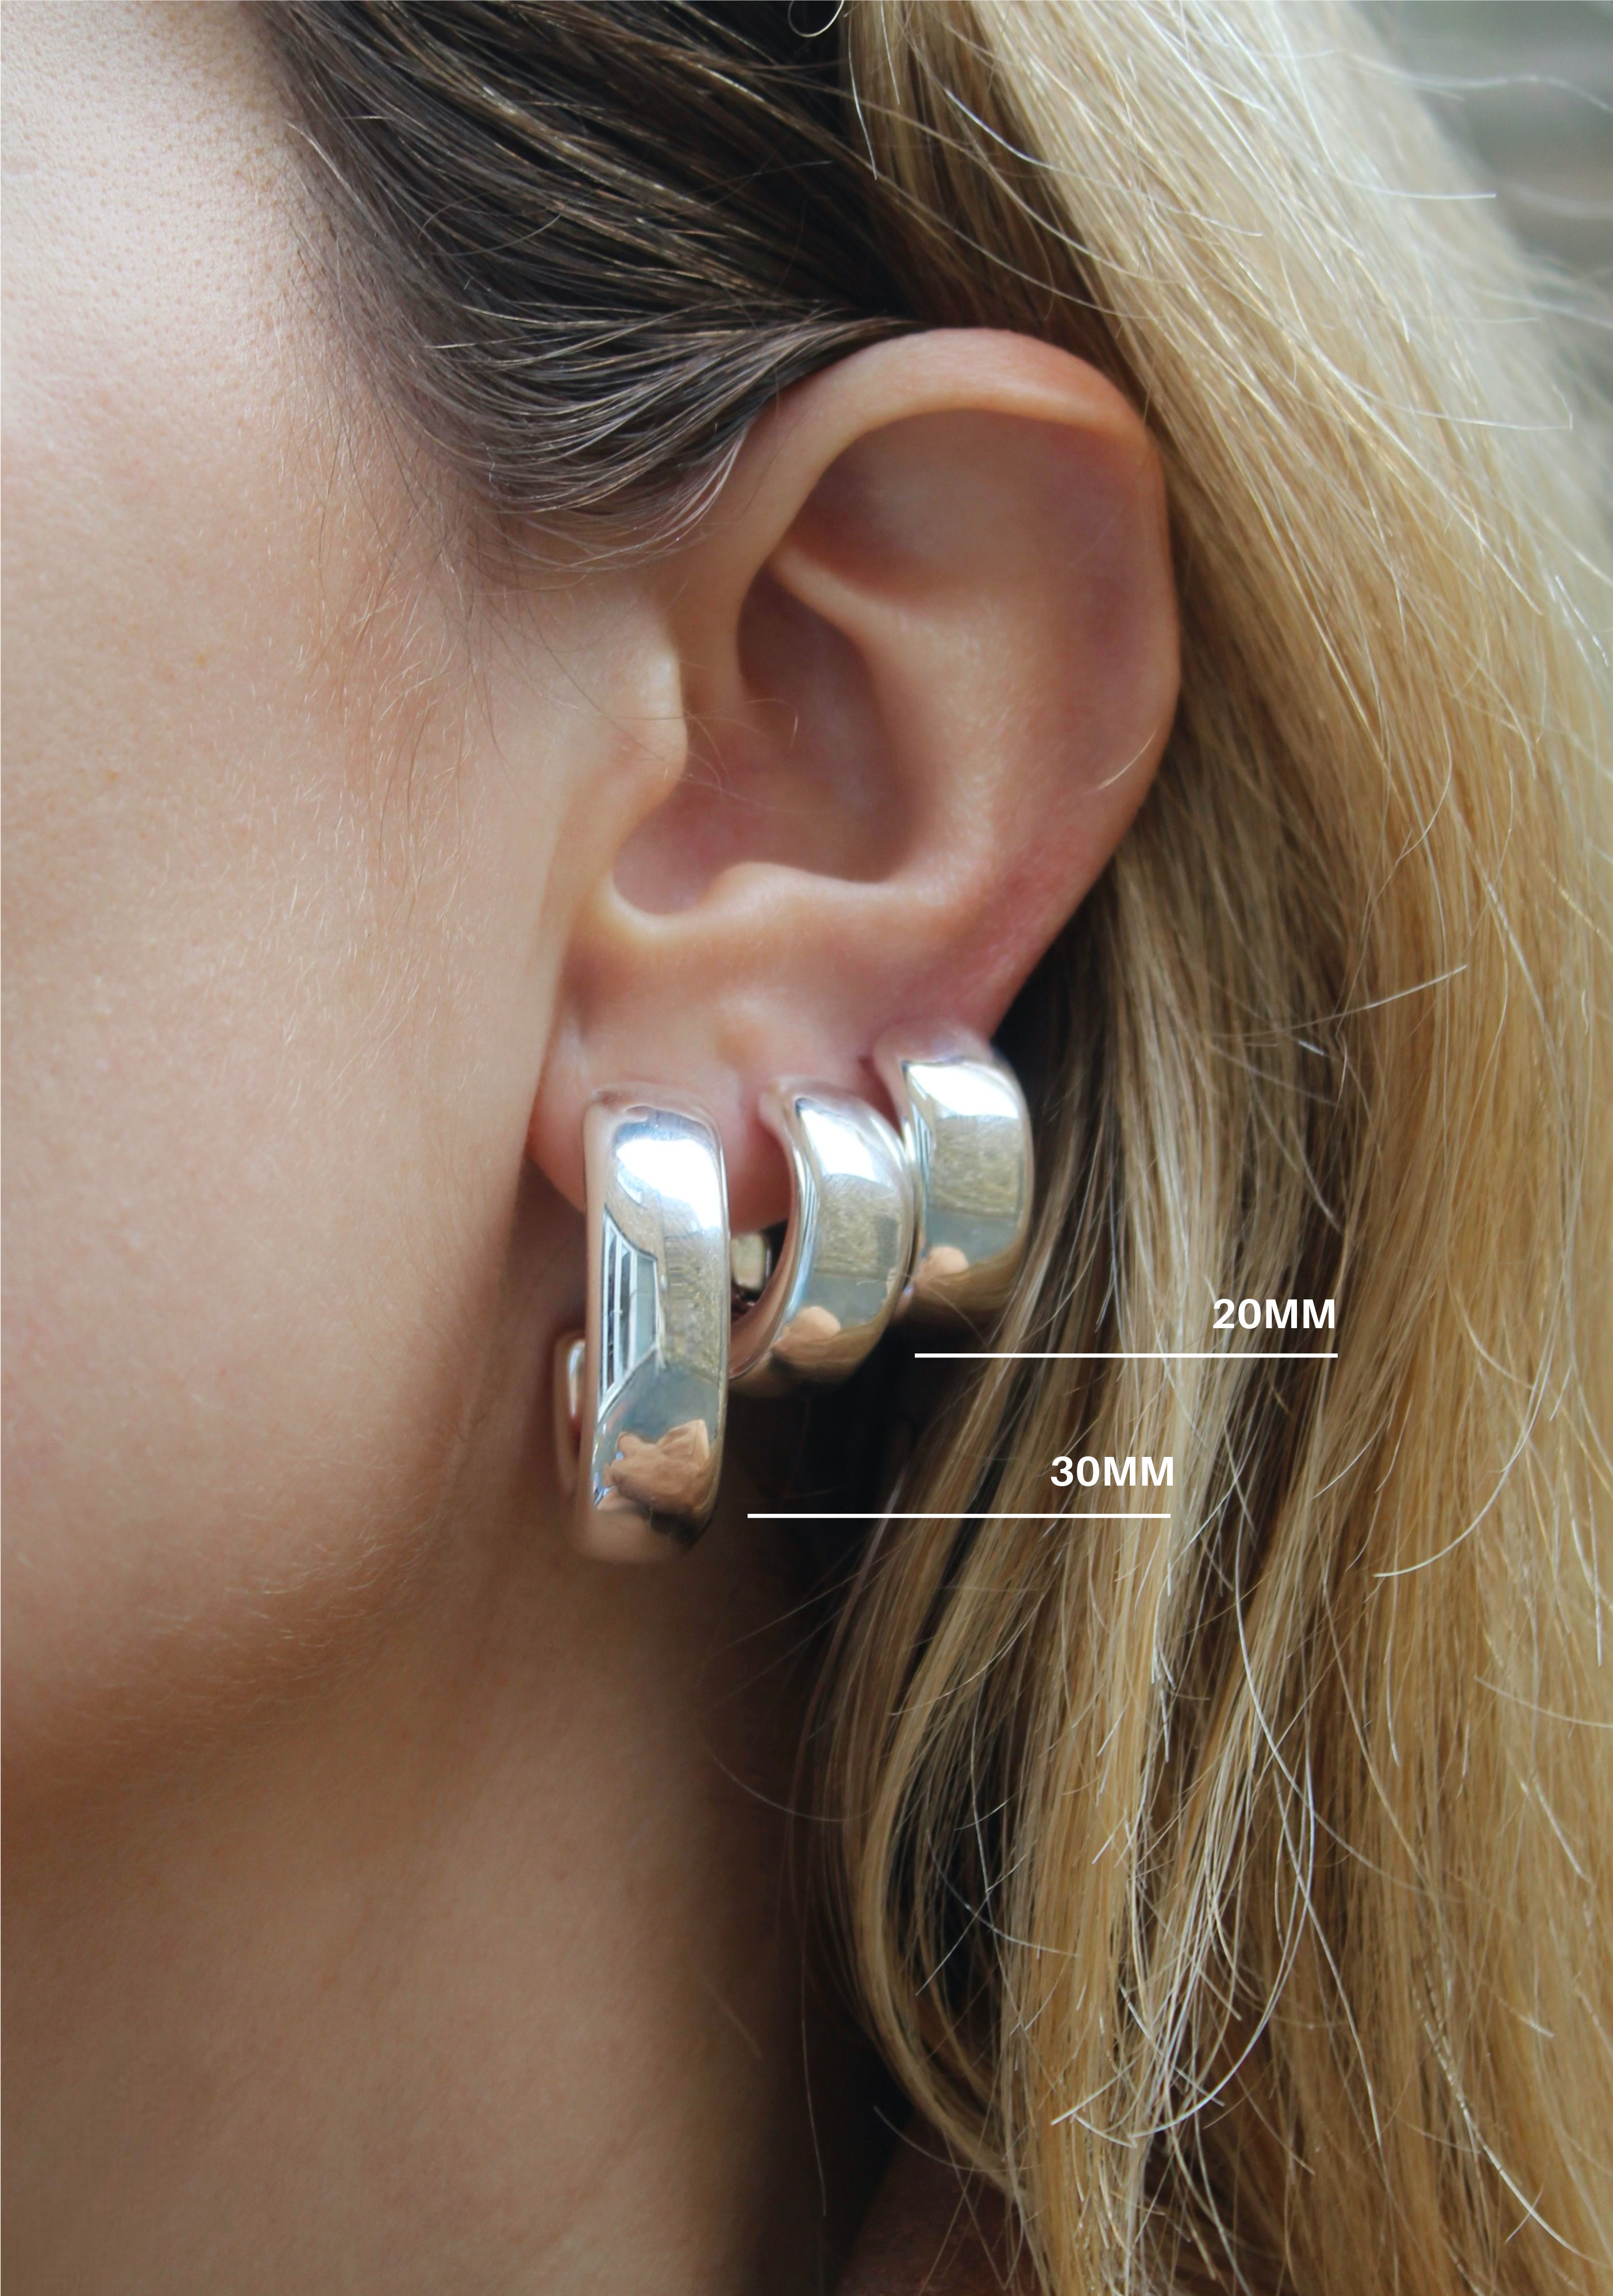 Chubby Small Silver Hoops